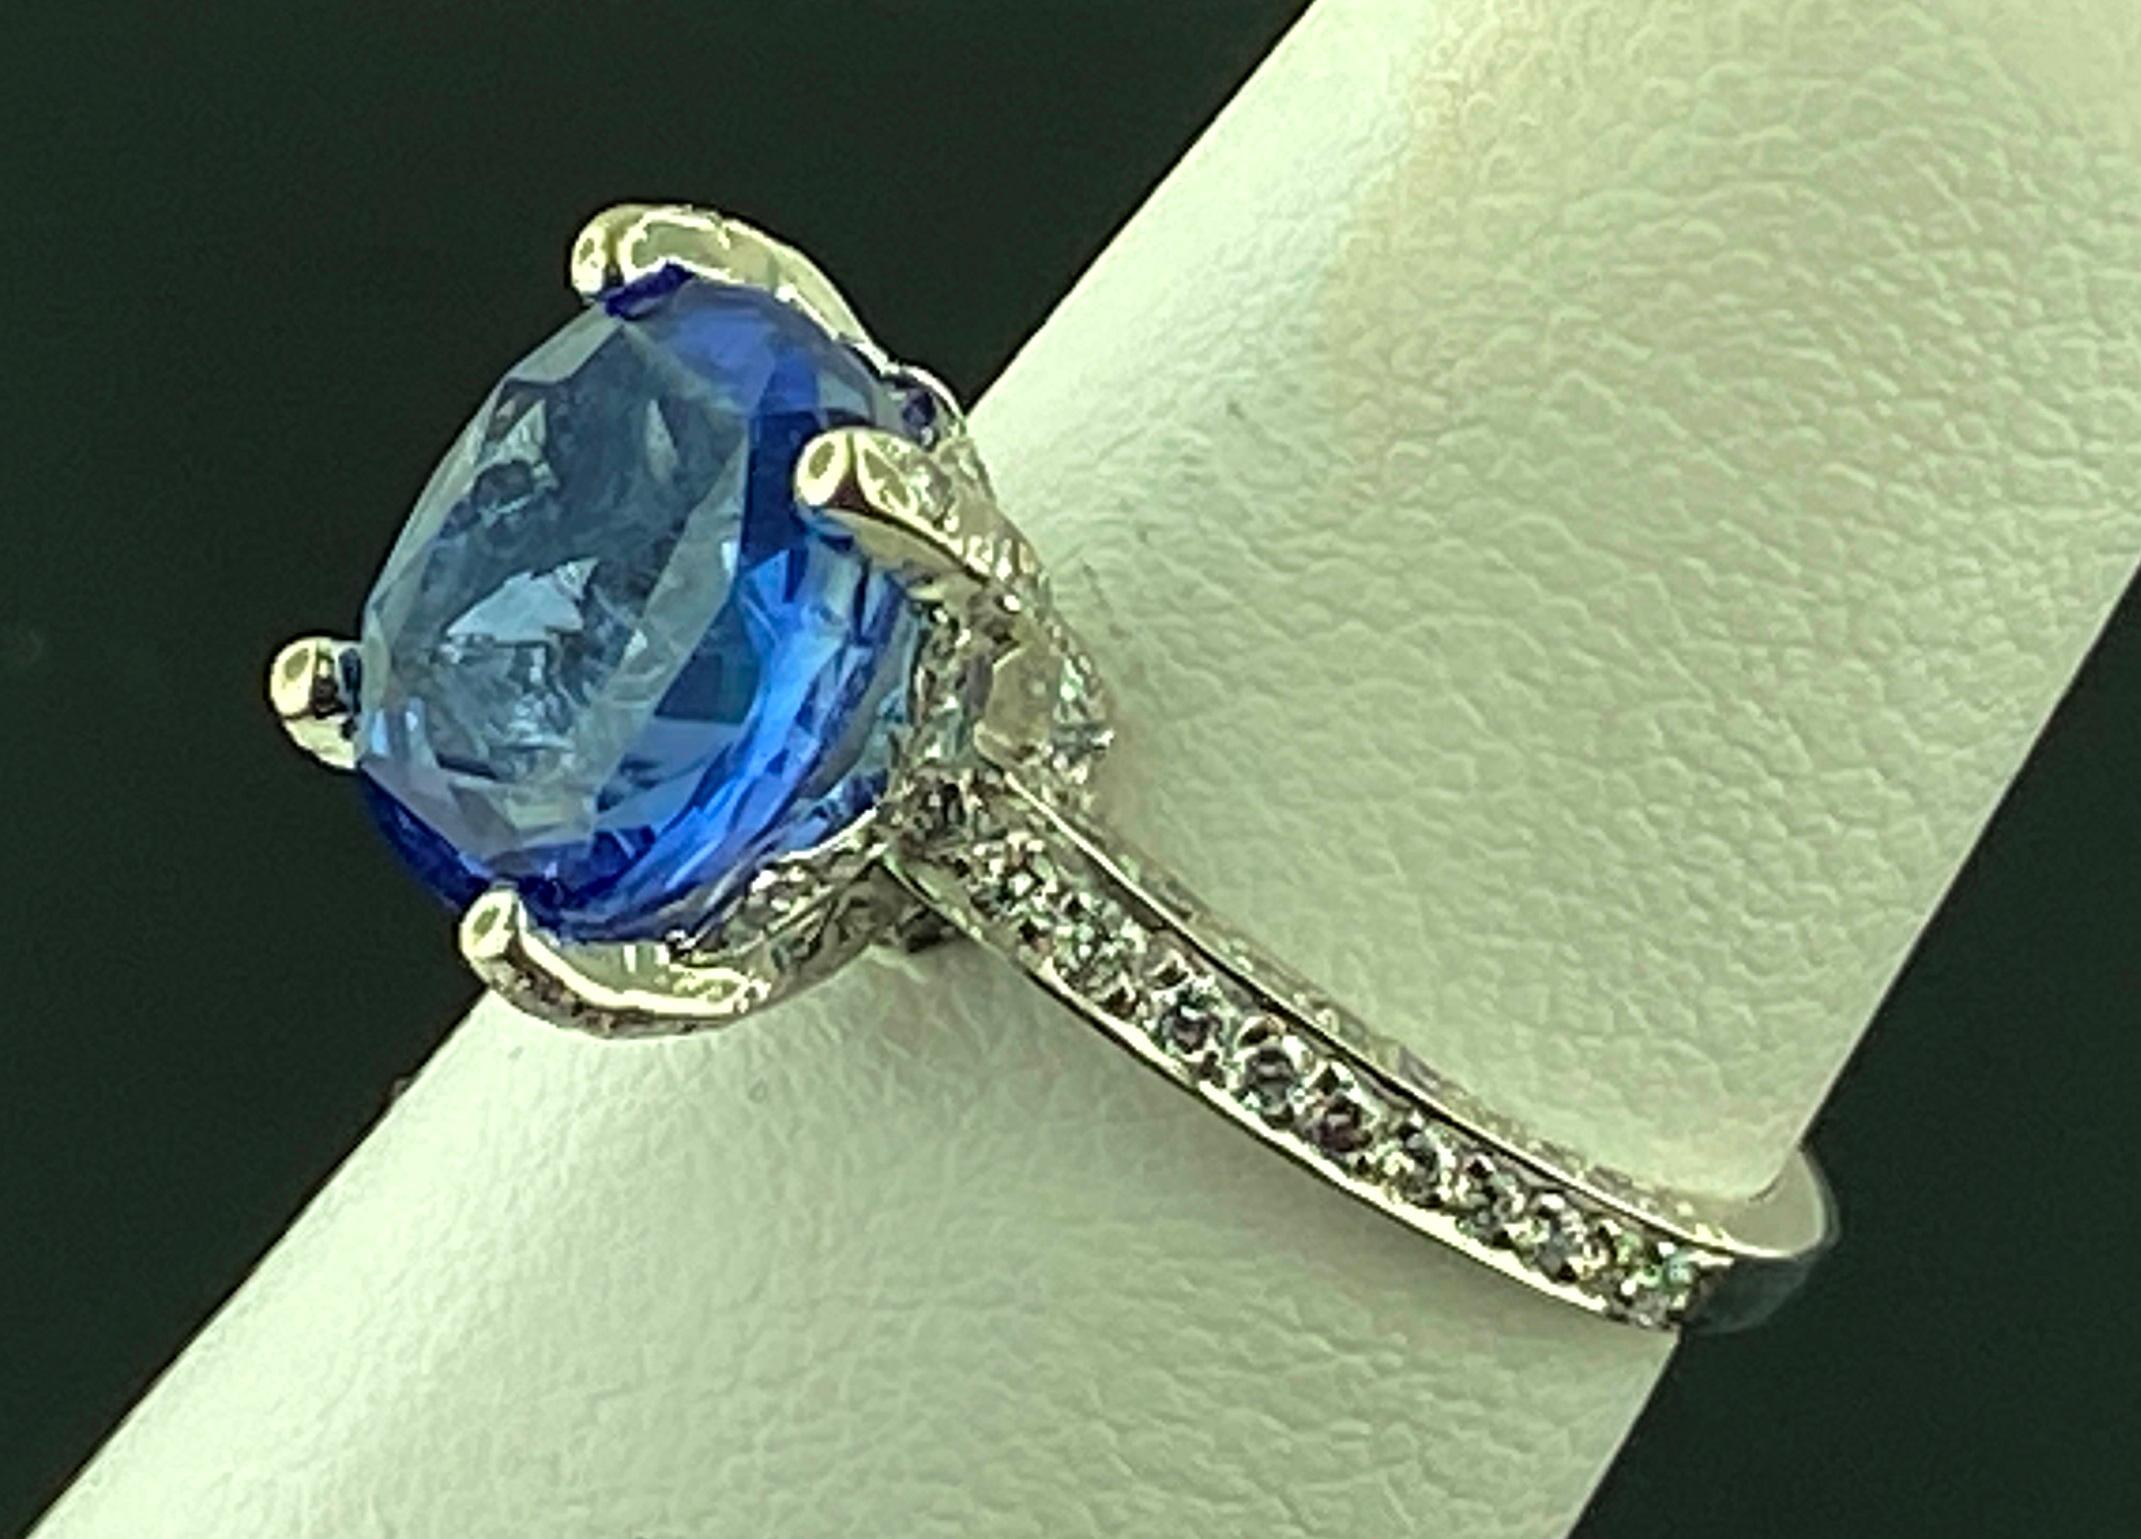 Set in Platinum, weighing 5 grams, is a 4.06 carat Oval Cut Blue Sapphire with 114 Round Brilliant Cut diamonds set in the mounting with a total diamond weight of 0.70 carats.  Ring Size is 6.